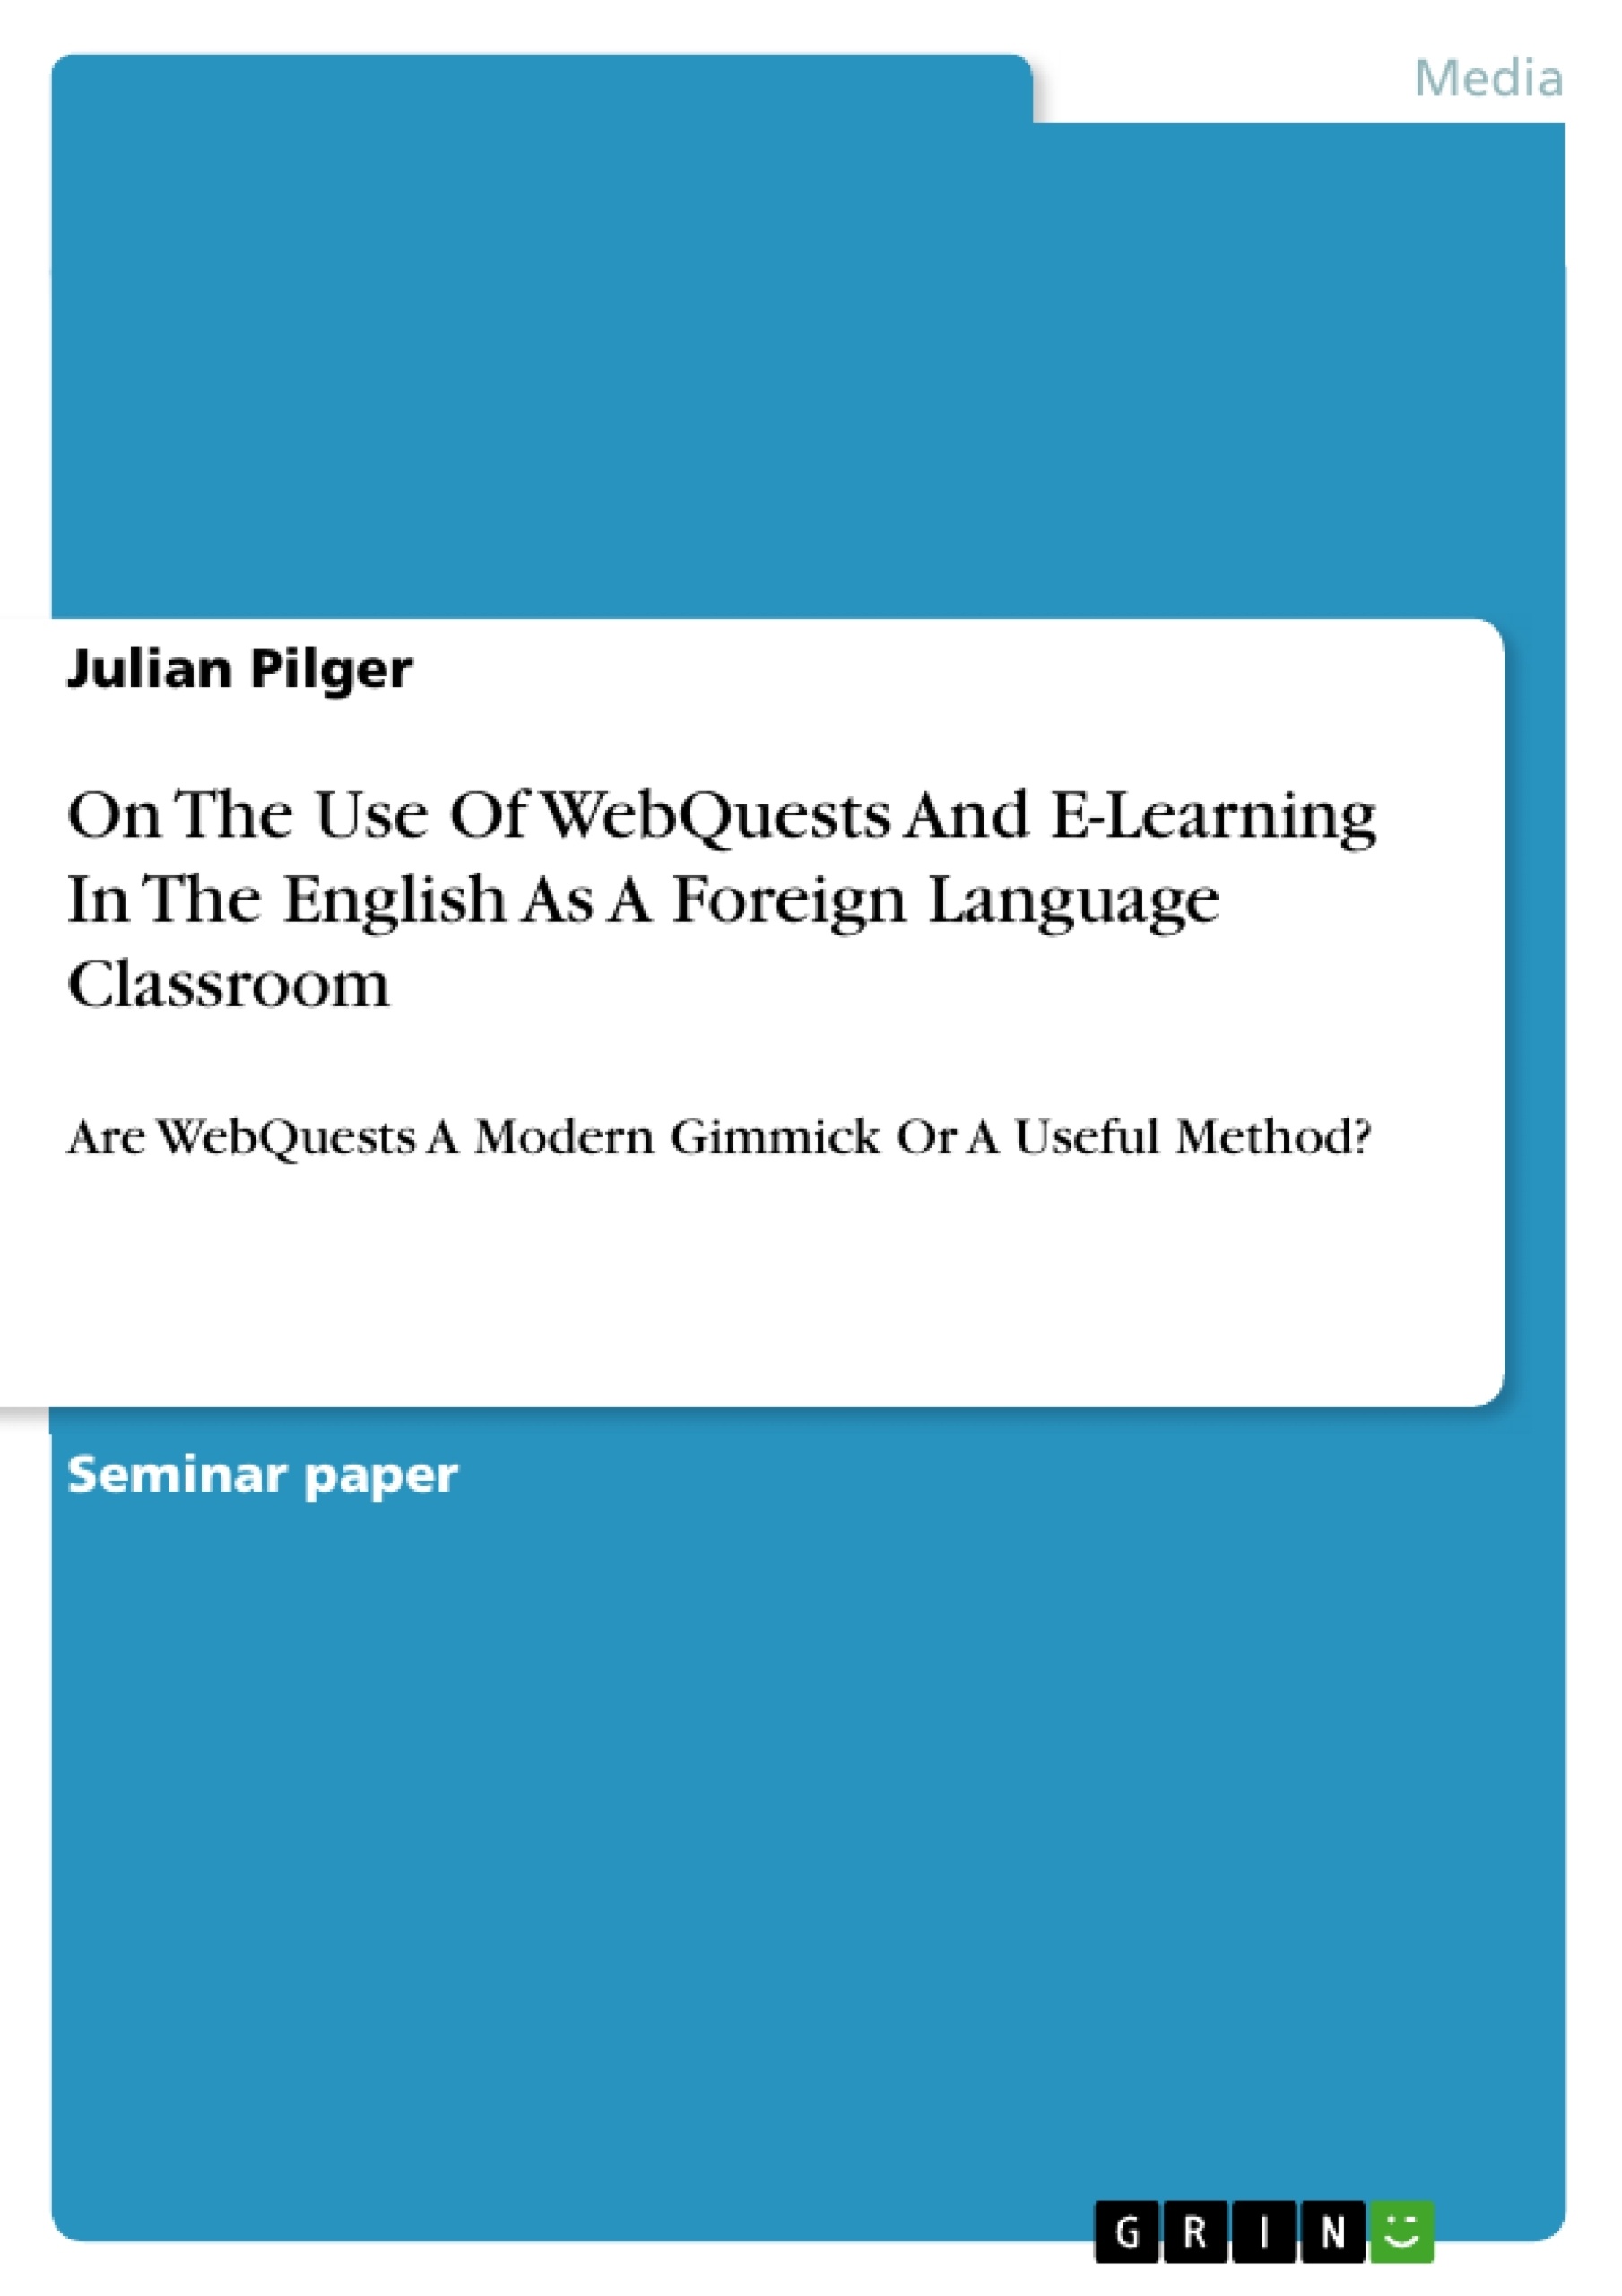 Título: On The Use Of WebQuests And E-Learning In The English As A Foreign Language Classroom